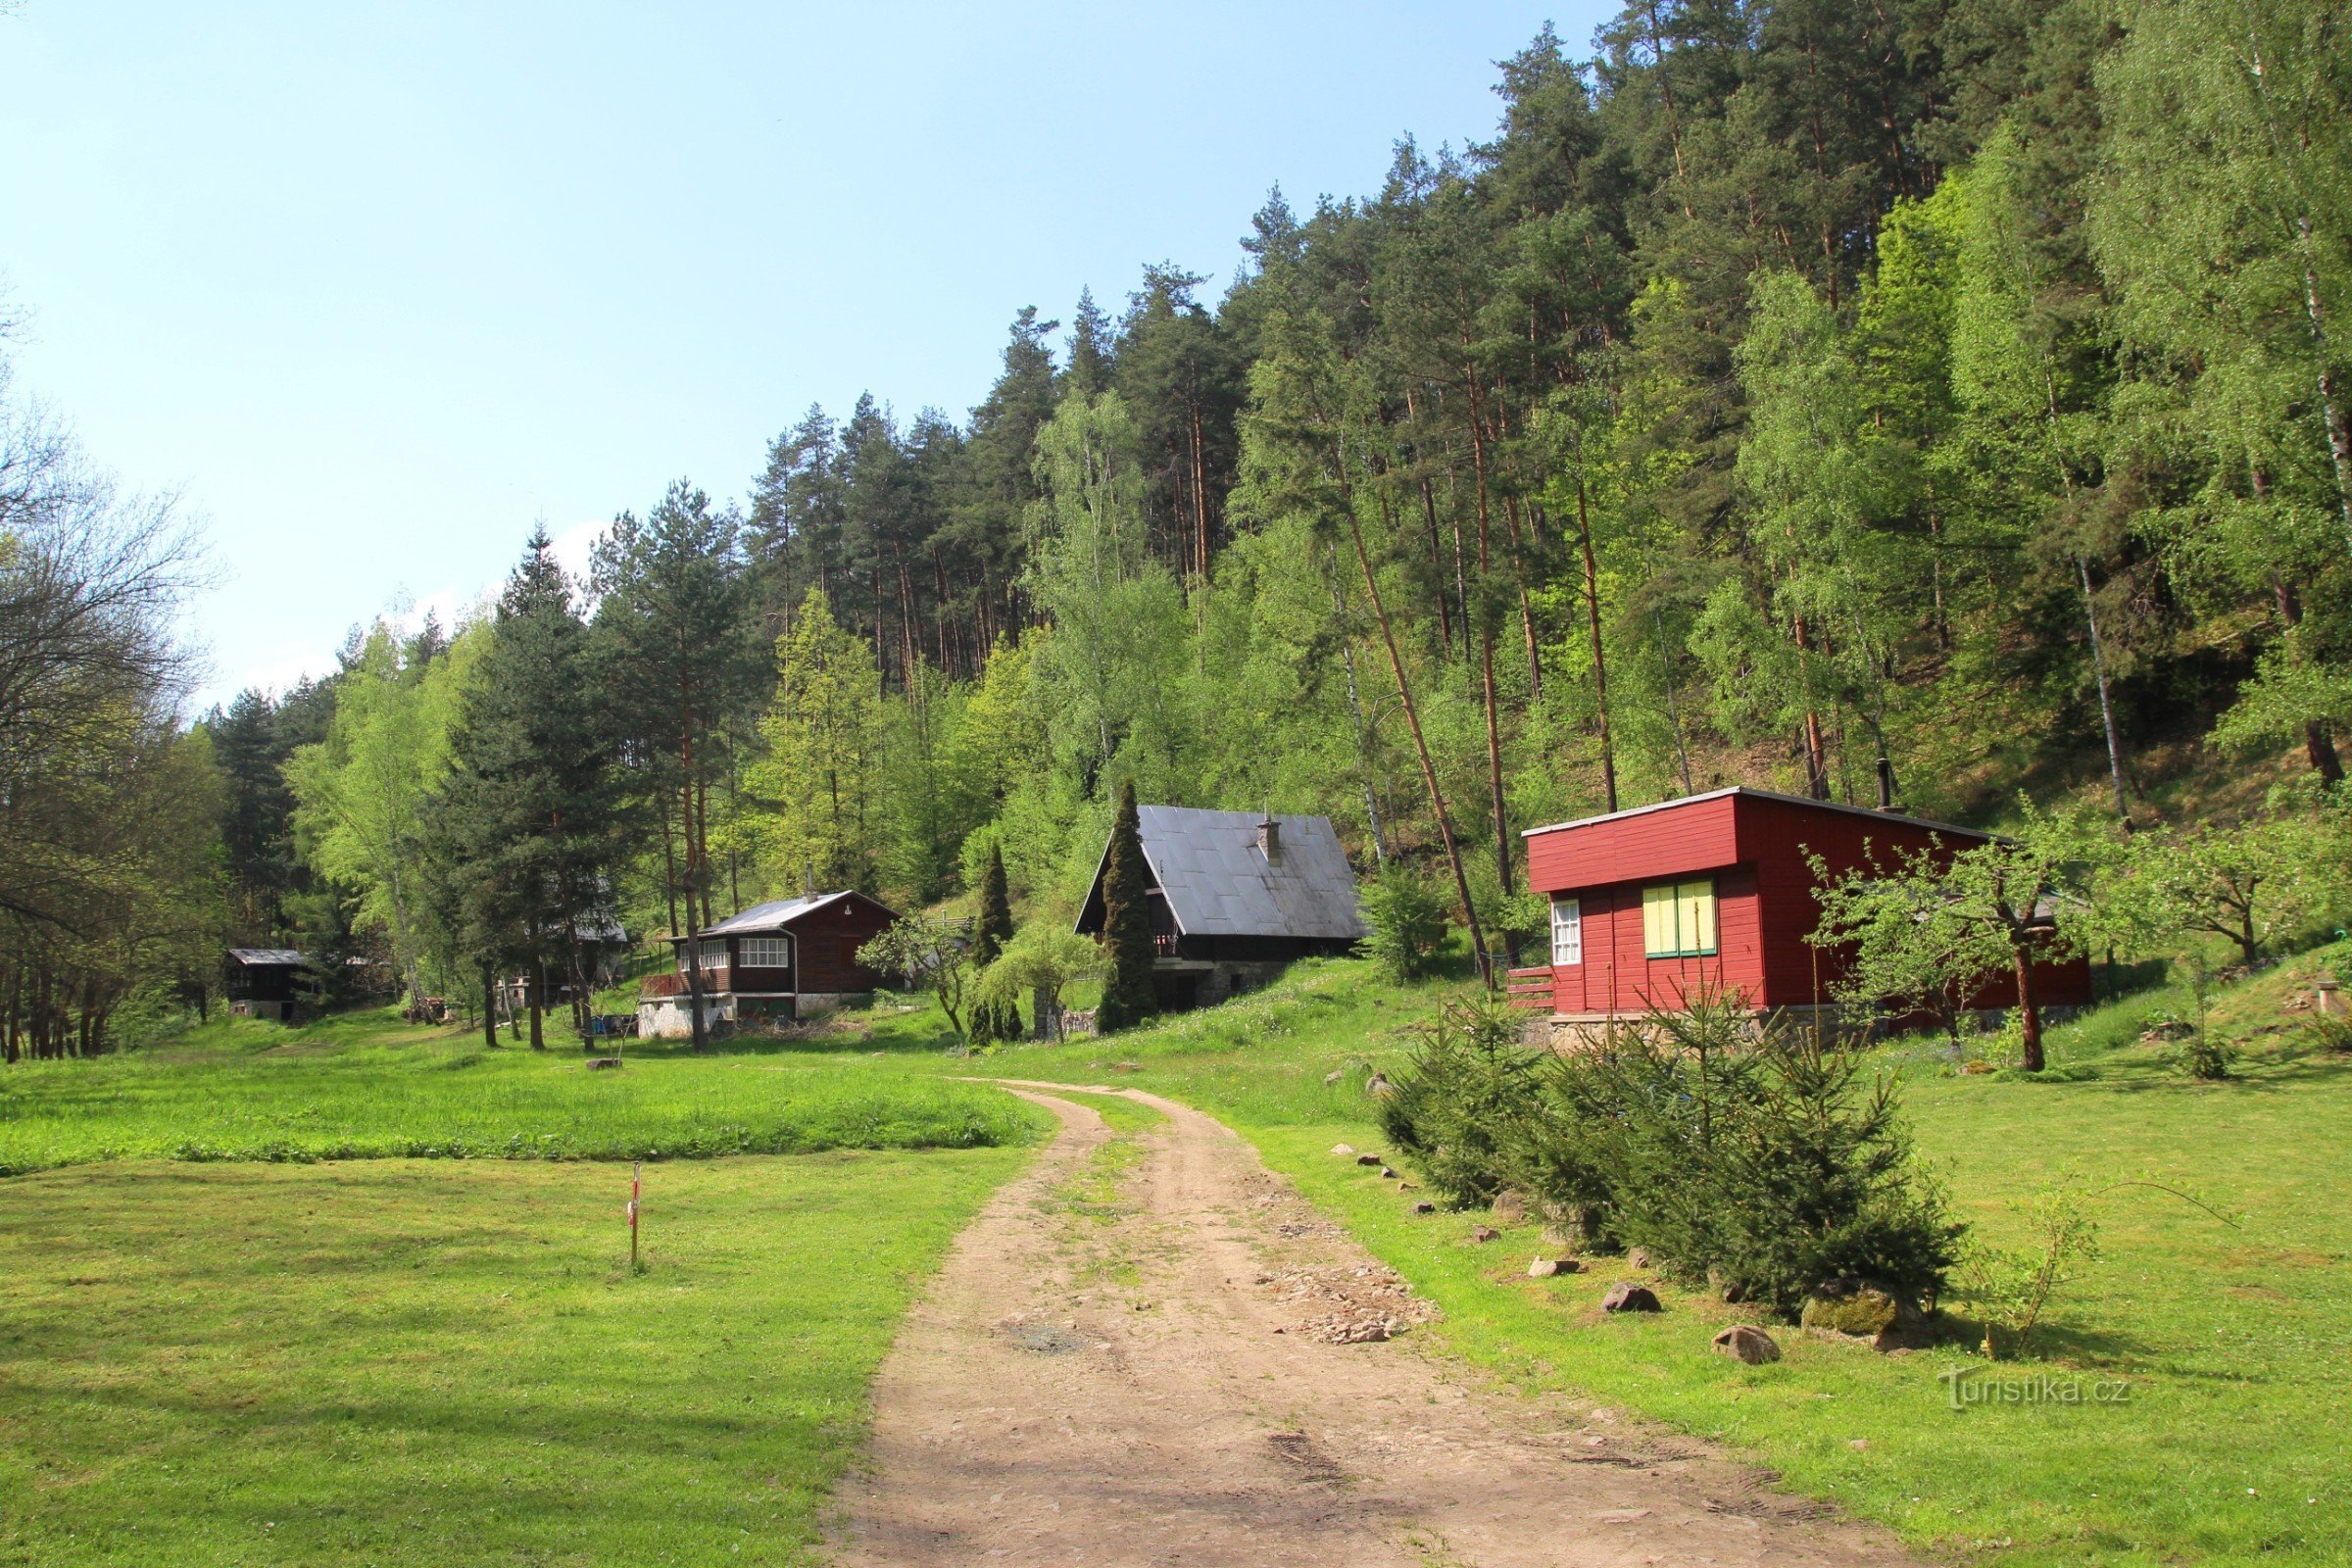 There are several holiday cottages in the vicinity